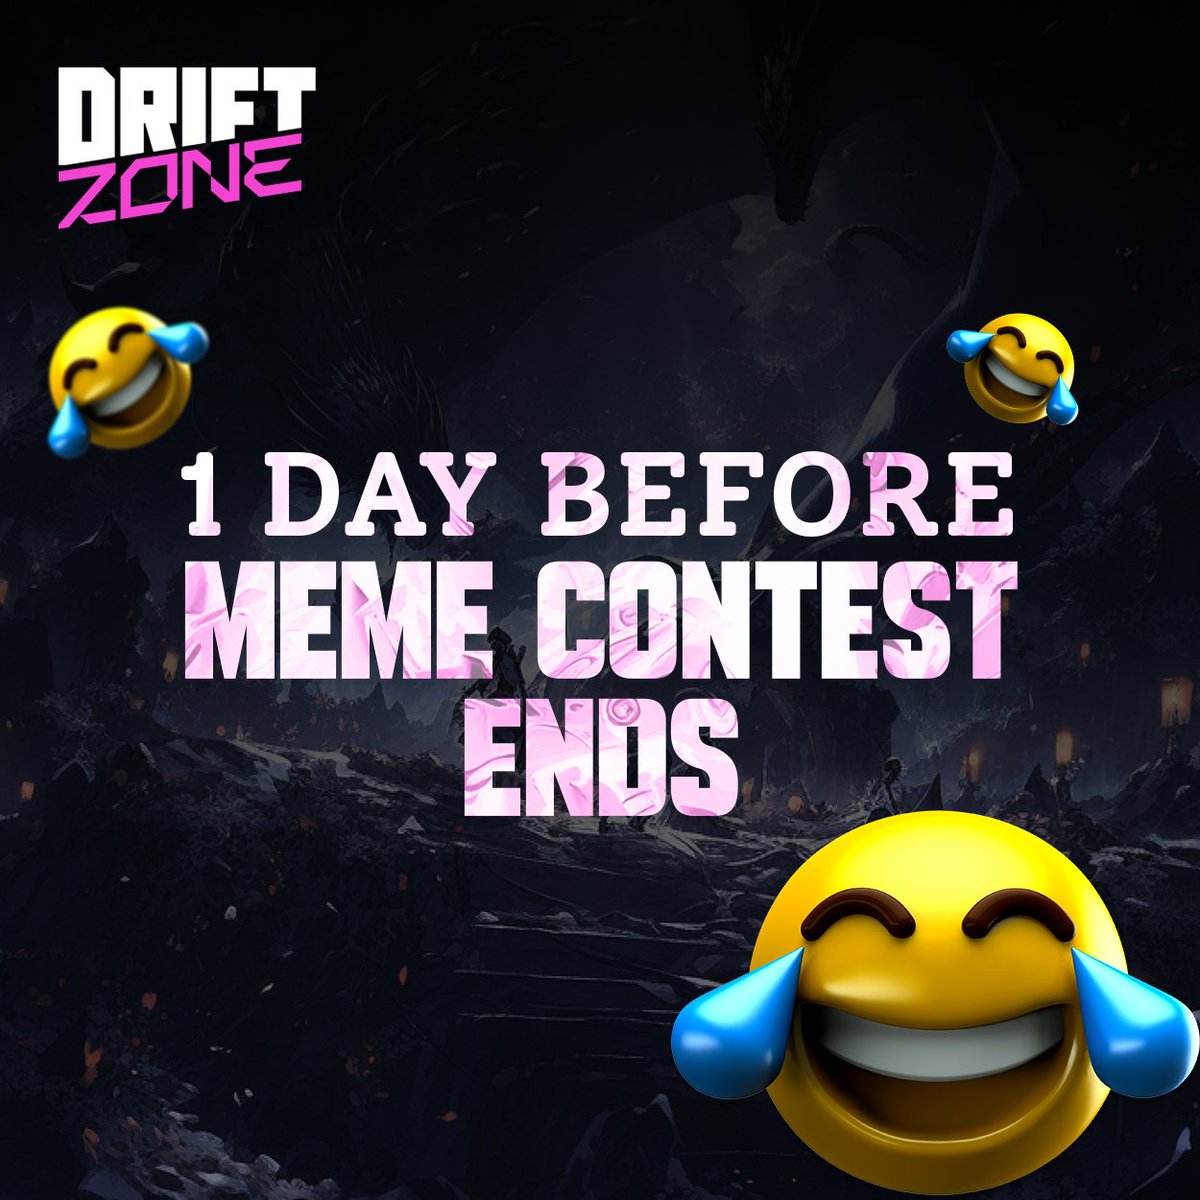 ⏳ Only 1 day left to join the DriftZone MEME Contest ‼️

🚀 Don't miss out on your chance to win $600 worth of Dimension cubes! 

🏃What are you waiting for? Unleash your creativity and compete to claim the top prize! 🎨💰 

#MemeContest @DriftZoneGG #Creative 

How to join…